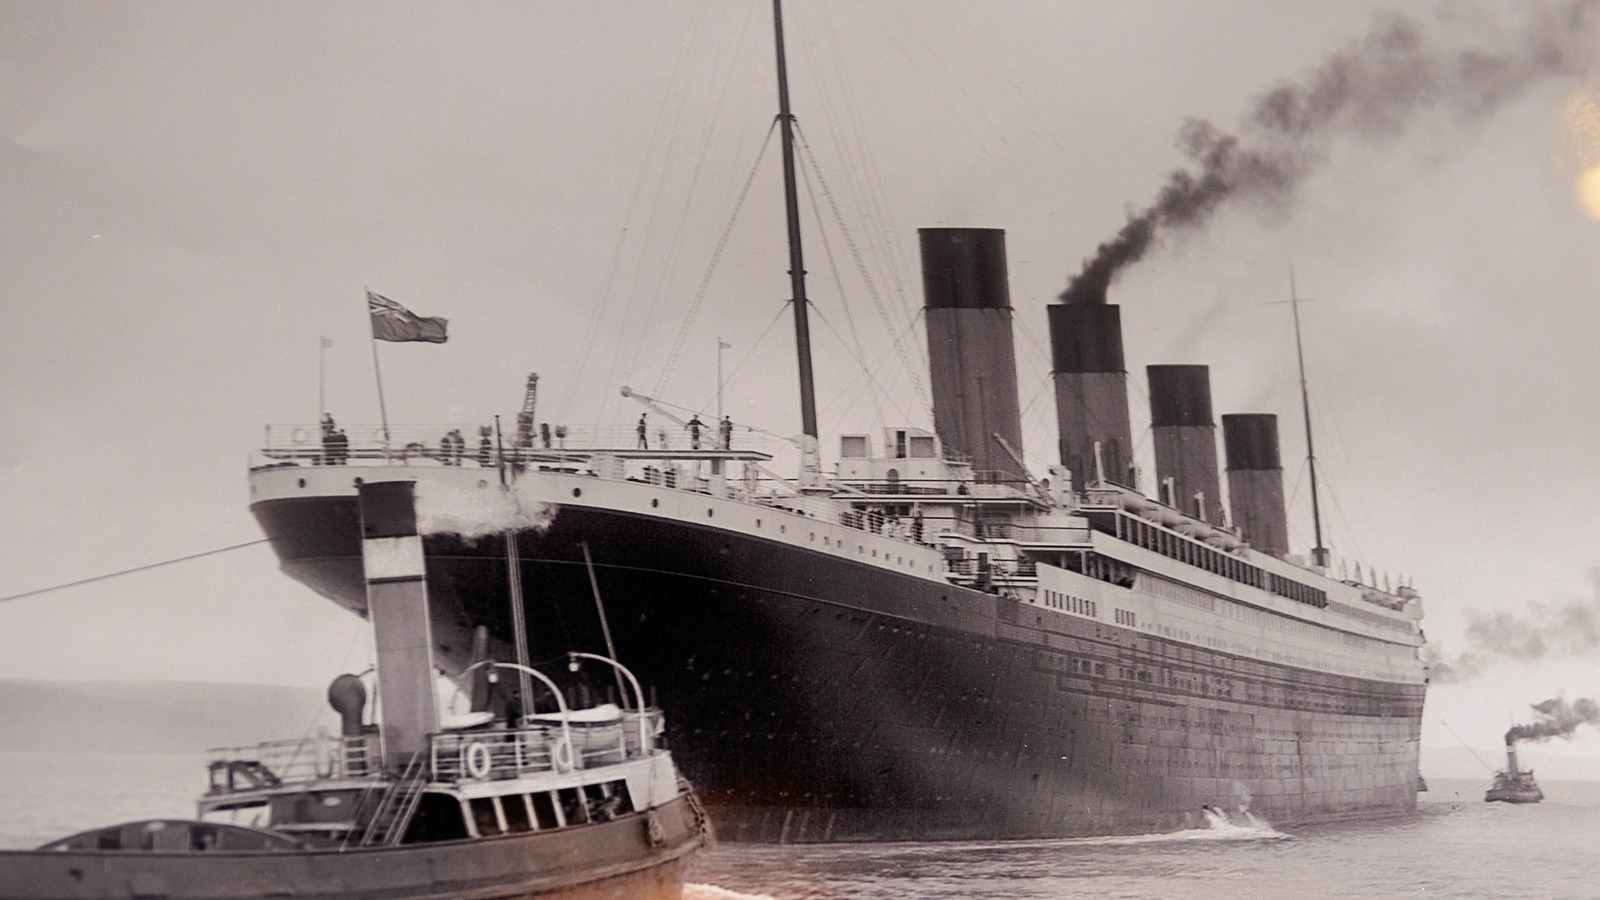 How much money did it cost to build the Titanic?